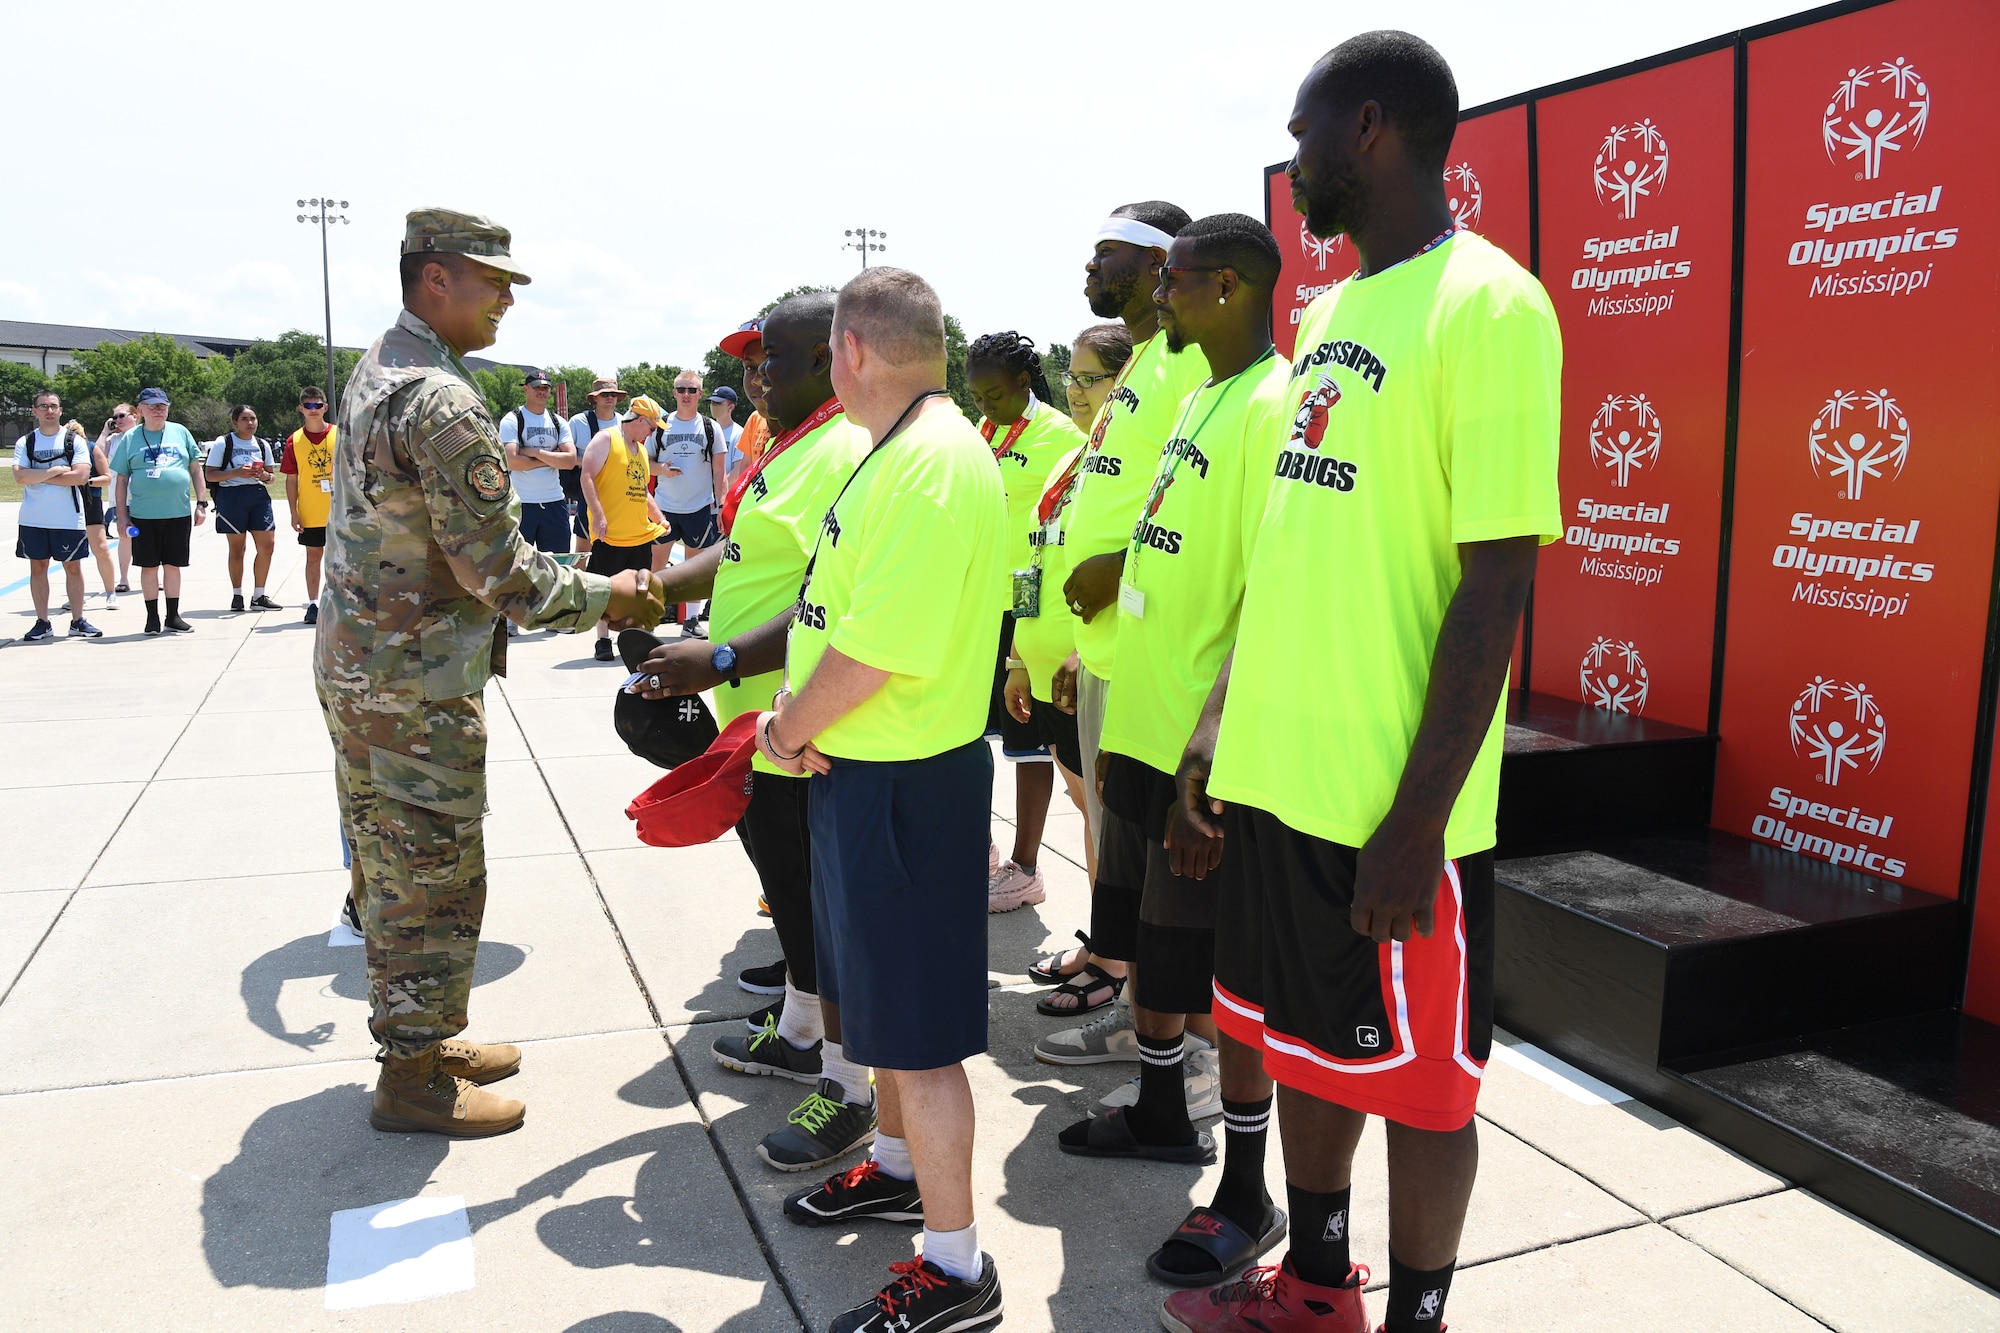 U.S. Air Force Maj. Marc Icban, 336th Training Squadron deputy commander, presents medals to the Mississippi Mud Bugs softball team during the Special Olympics Mississippi Summer Games at Keesler Air Force Base, Miss., May 14, 2022. Over 600 athletes participated in the Summer Games. (U.S. Air Force photo by Kemberly Groue)